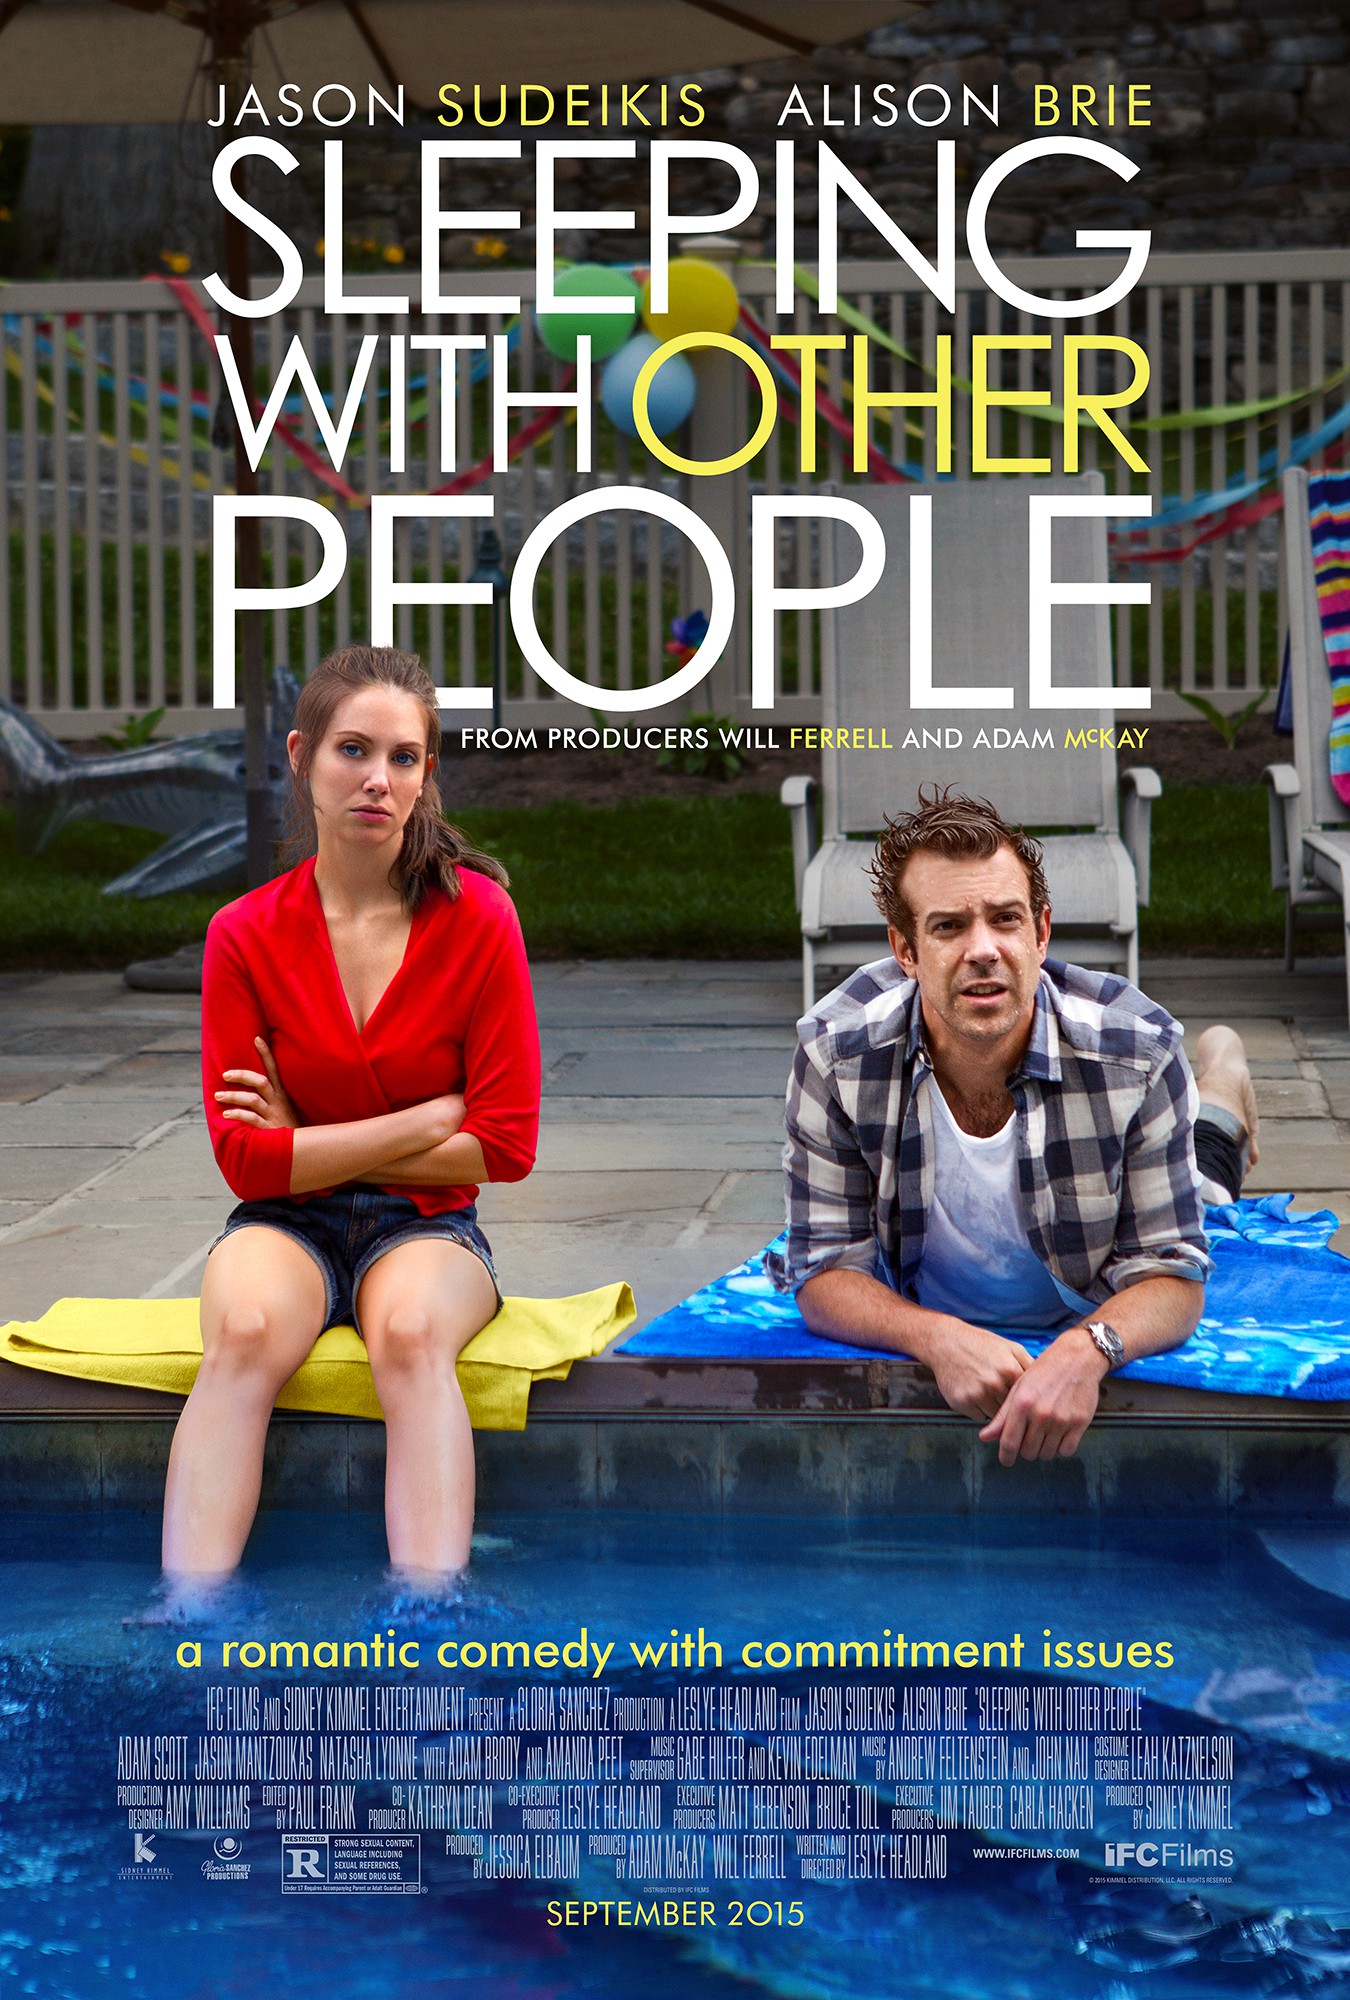 Sleeping With Other People Trailer Poster Jason Sudeikis And Alison